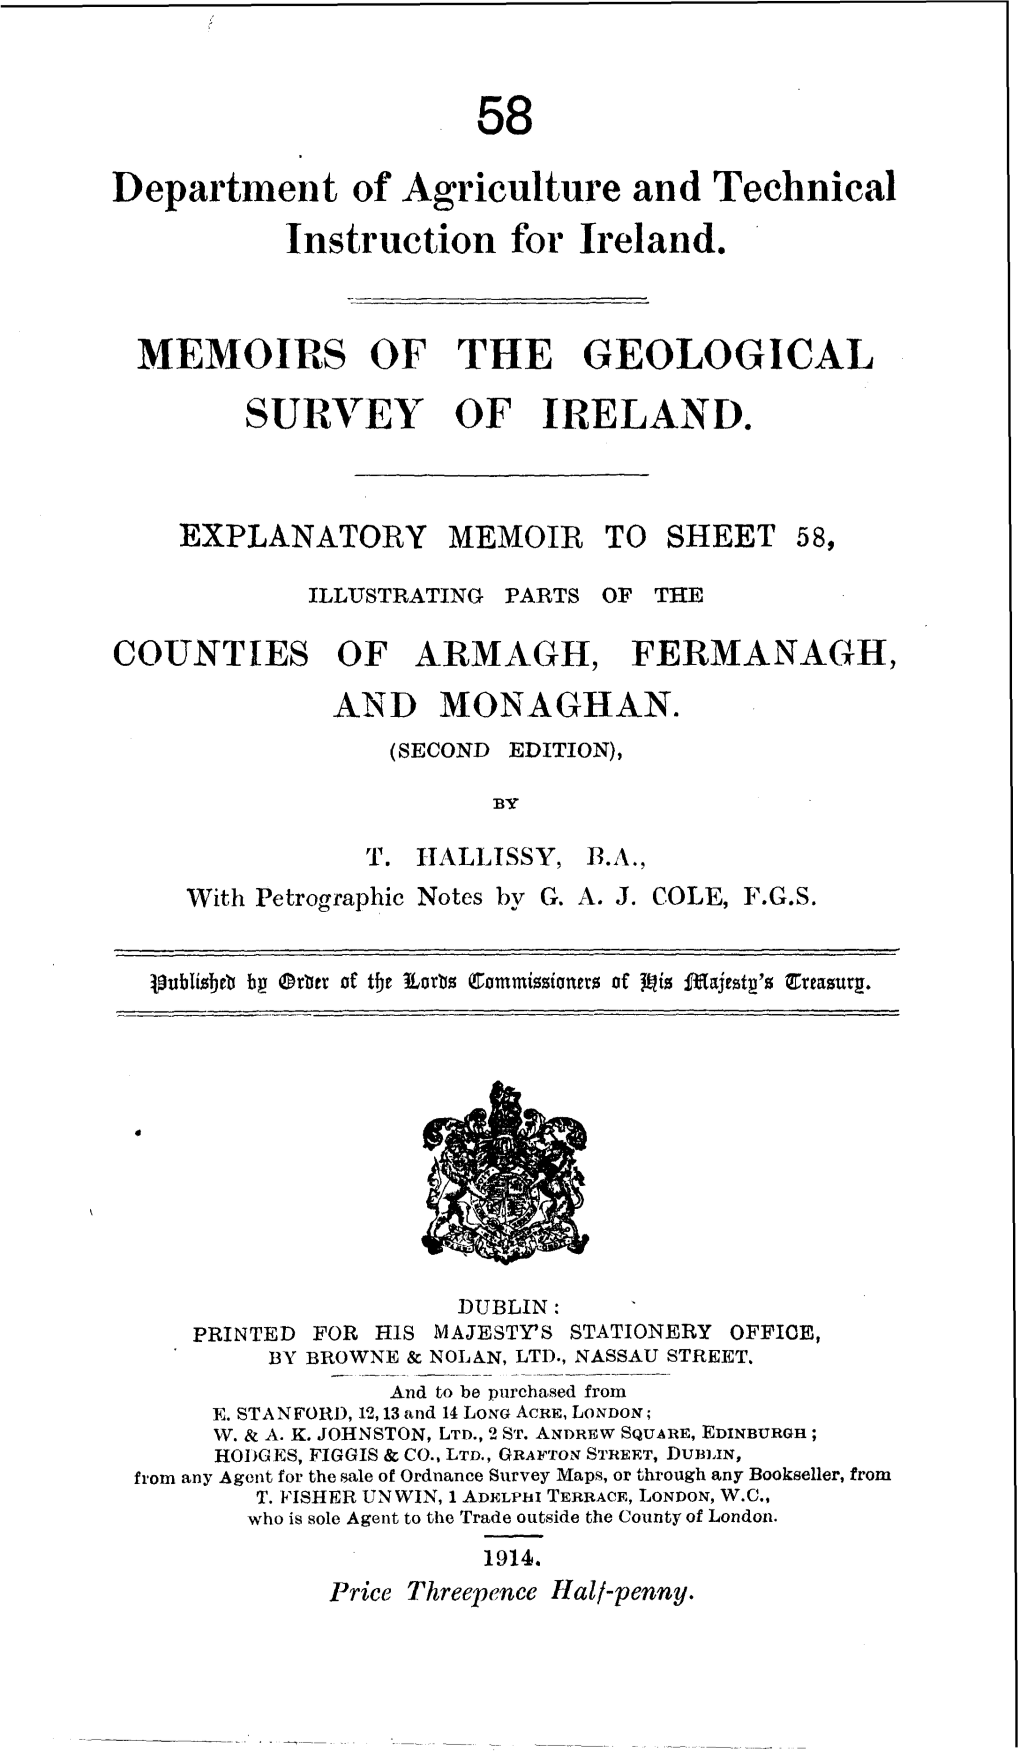 Explanatory Memoir to Accompany Sheet 58 of the Maps of the Geological Survey of Ireland, Illustrating Parts of the Counties Of